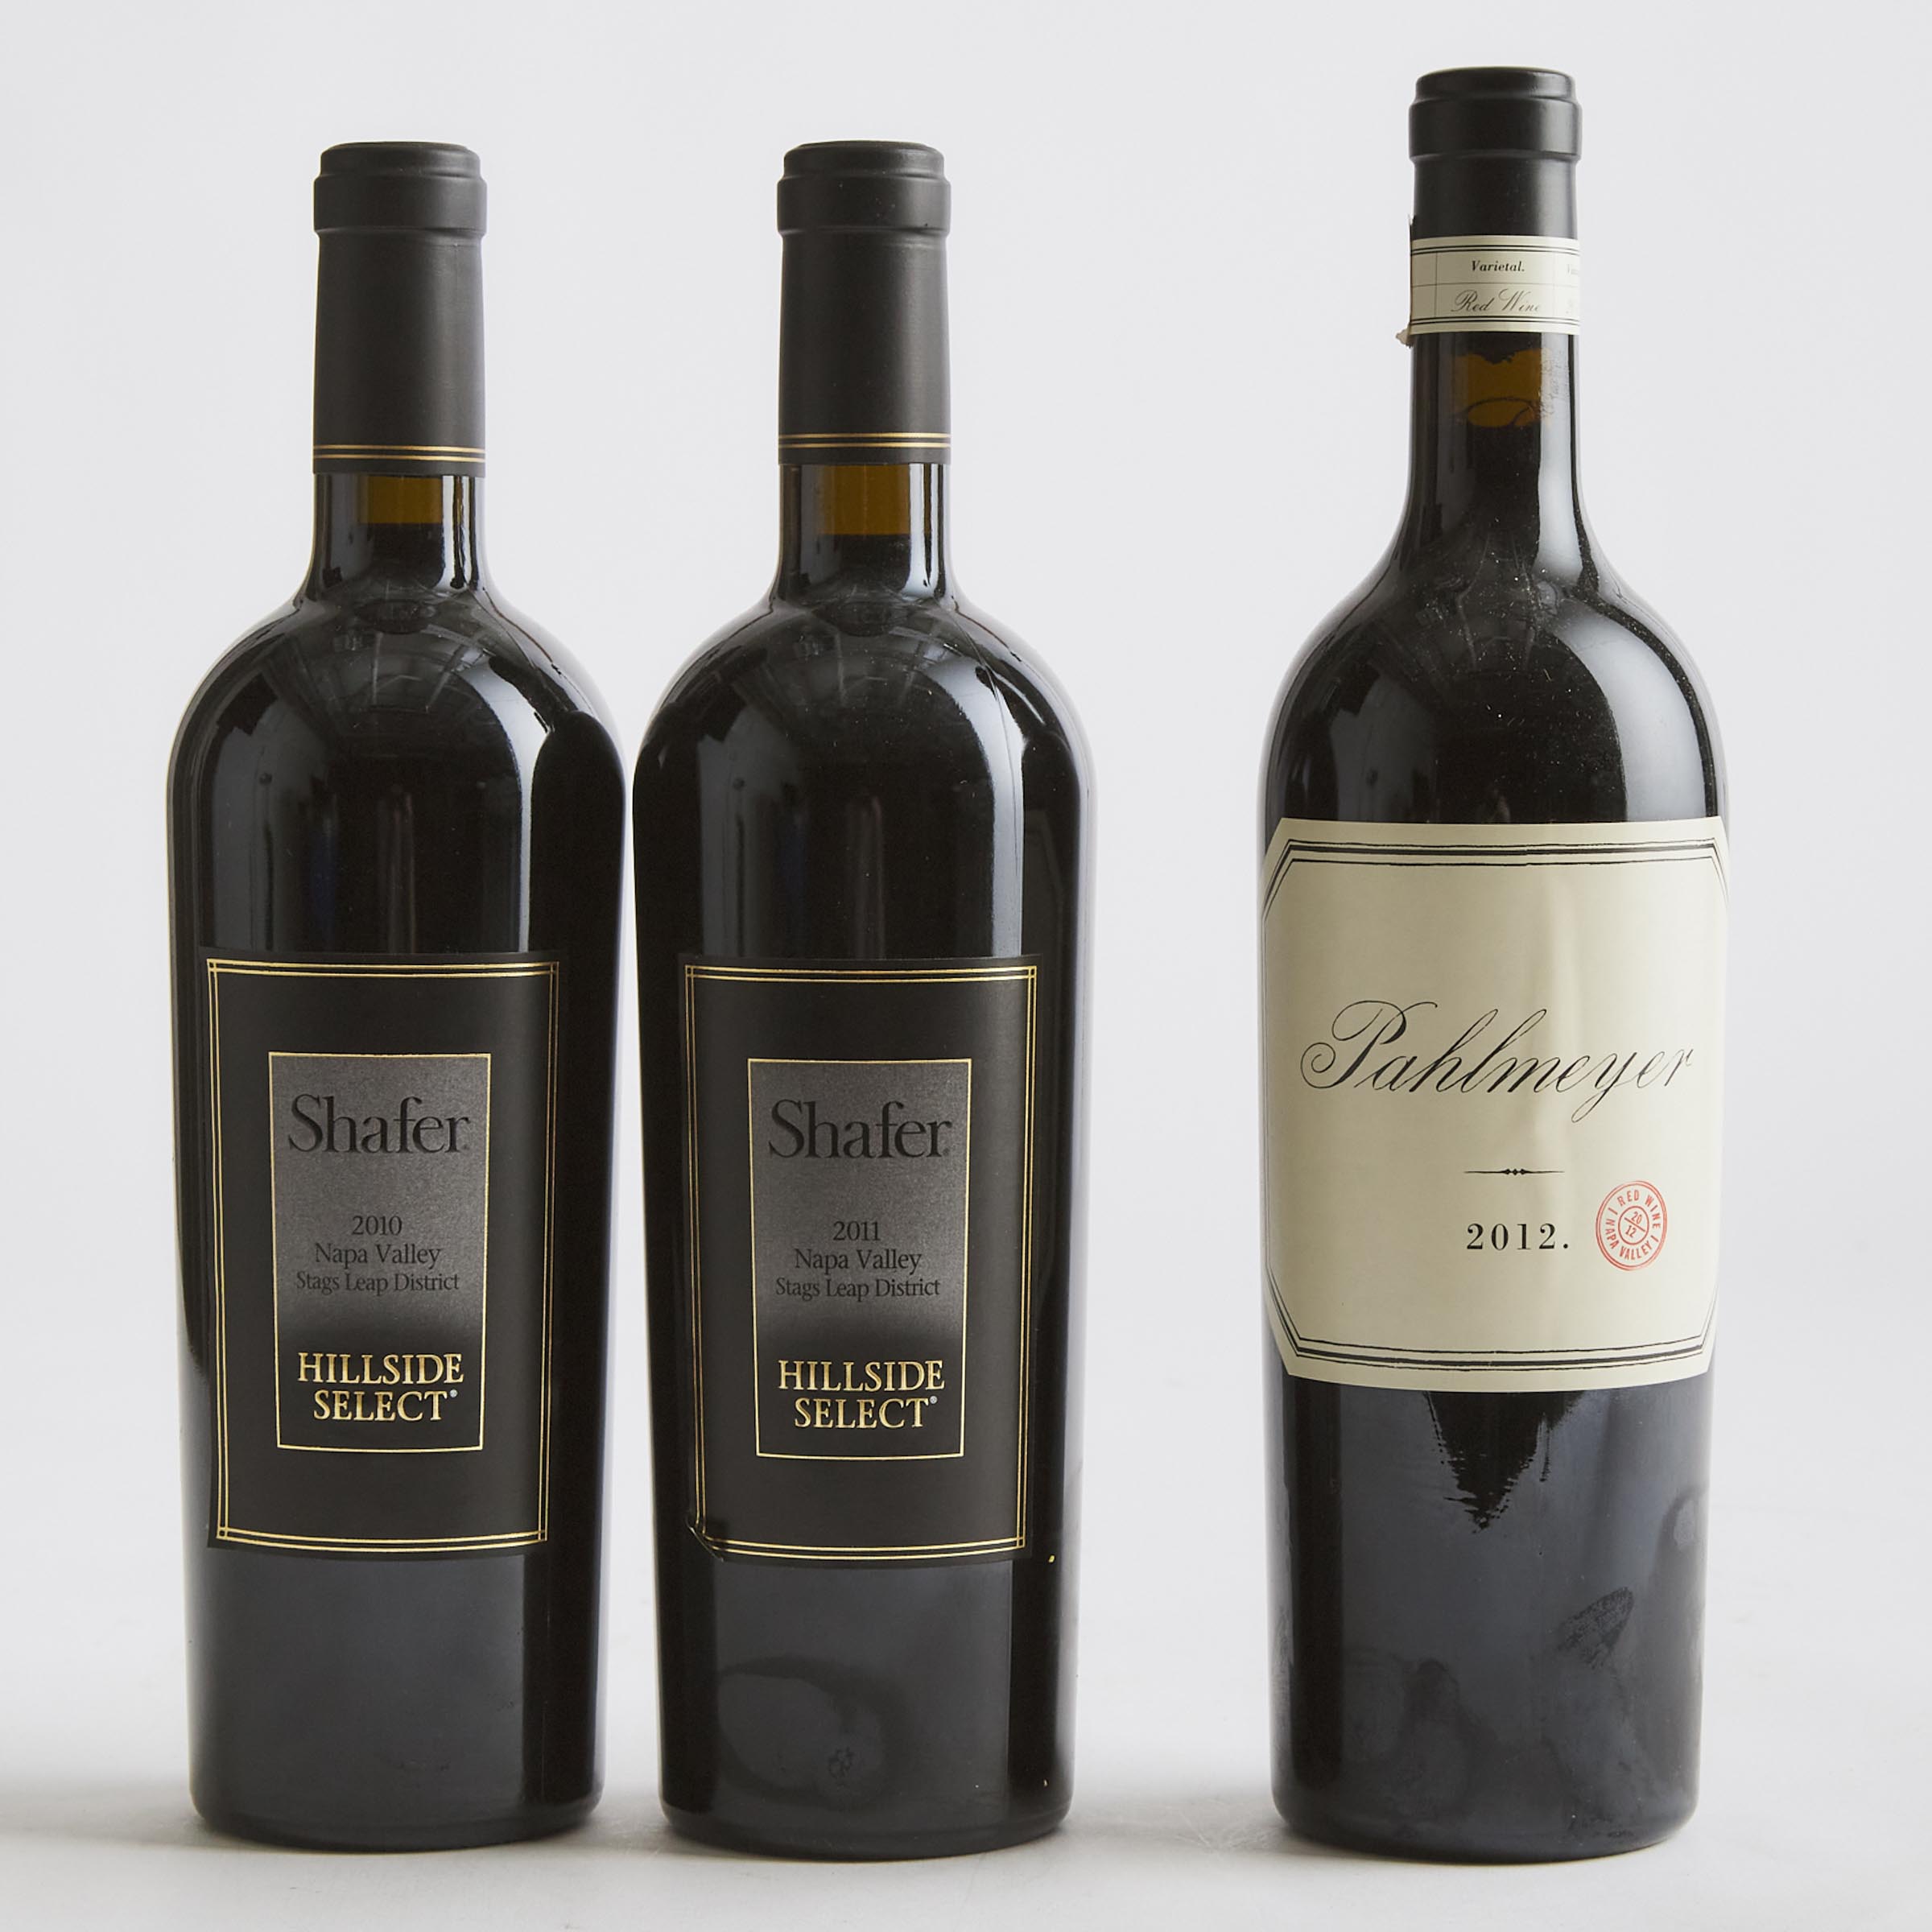 PAHLMEYER PROPRIETARY RED 2012 (1)
SHAFER CABERNET SAUVIGNON HILLSIDE SELECT 2010 (1)
SHAFER CABERNET SAUVIGNON HILLSIDE SELECT 2011 (1)